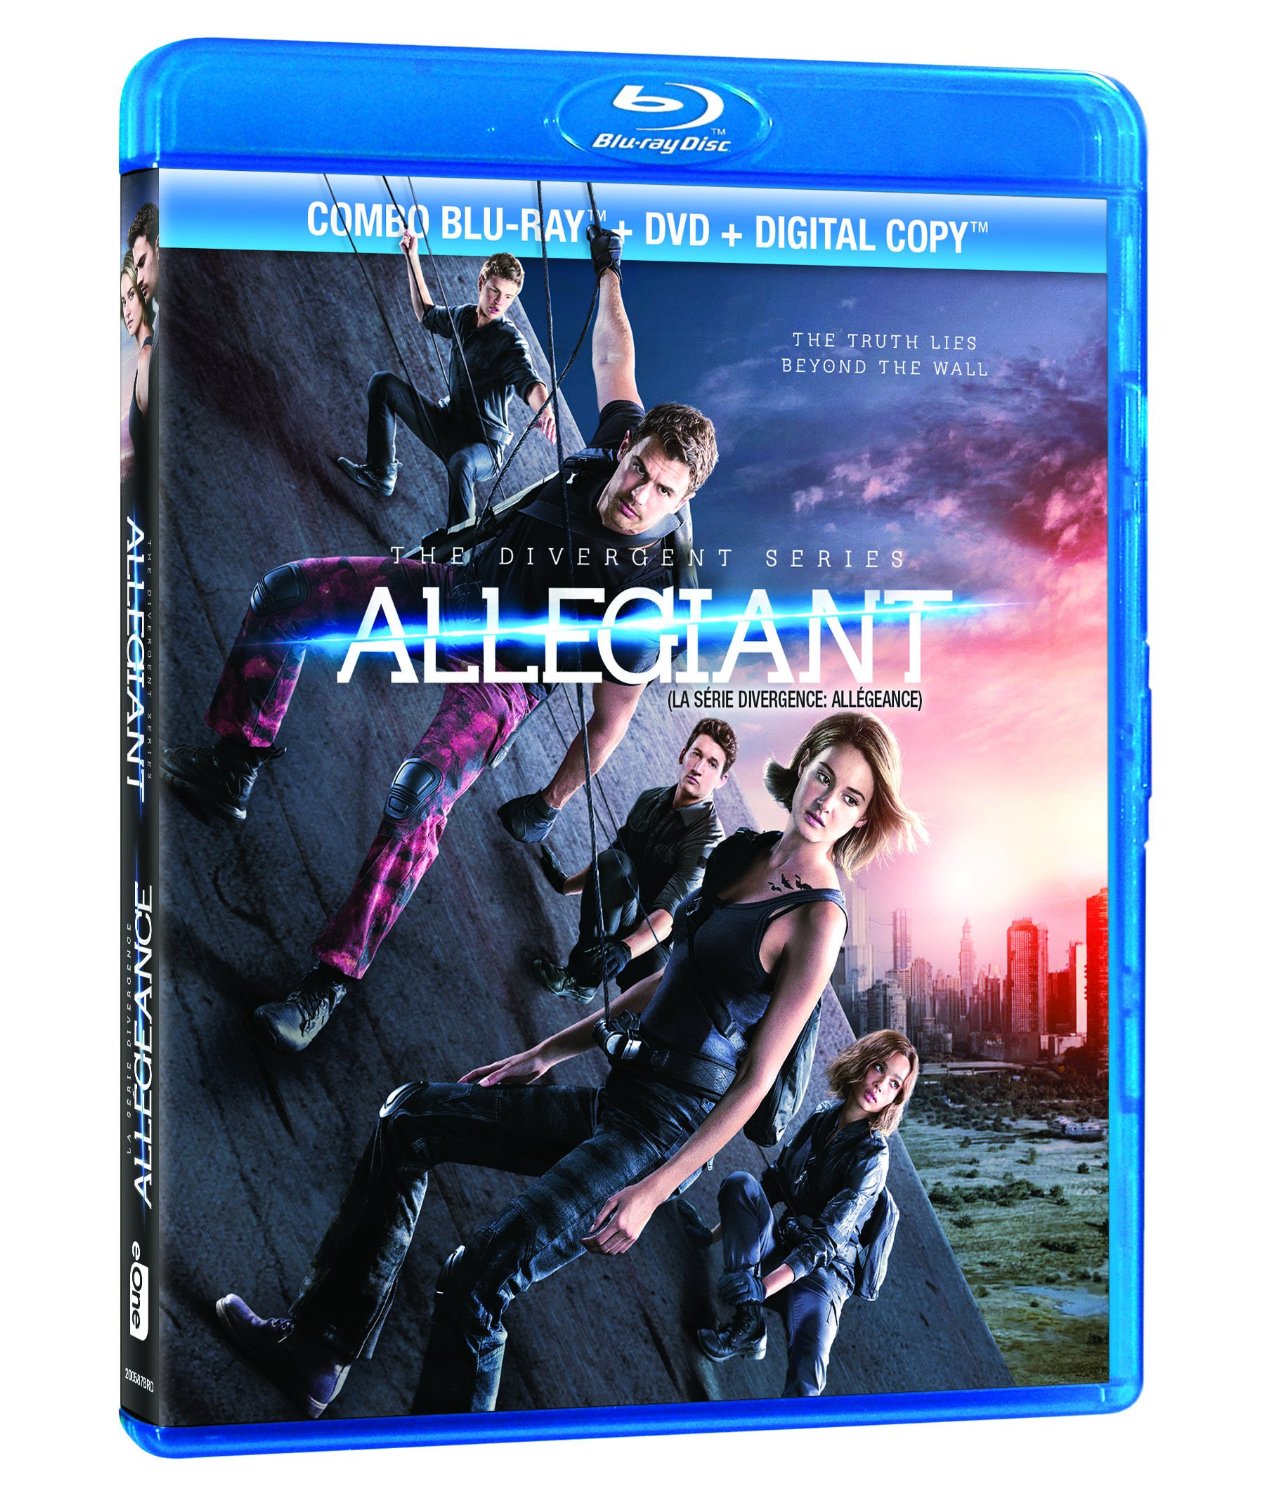 The Divergent Series: Allegiant Blu-ray cover